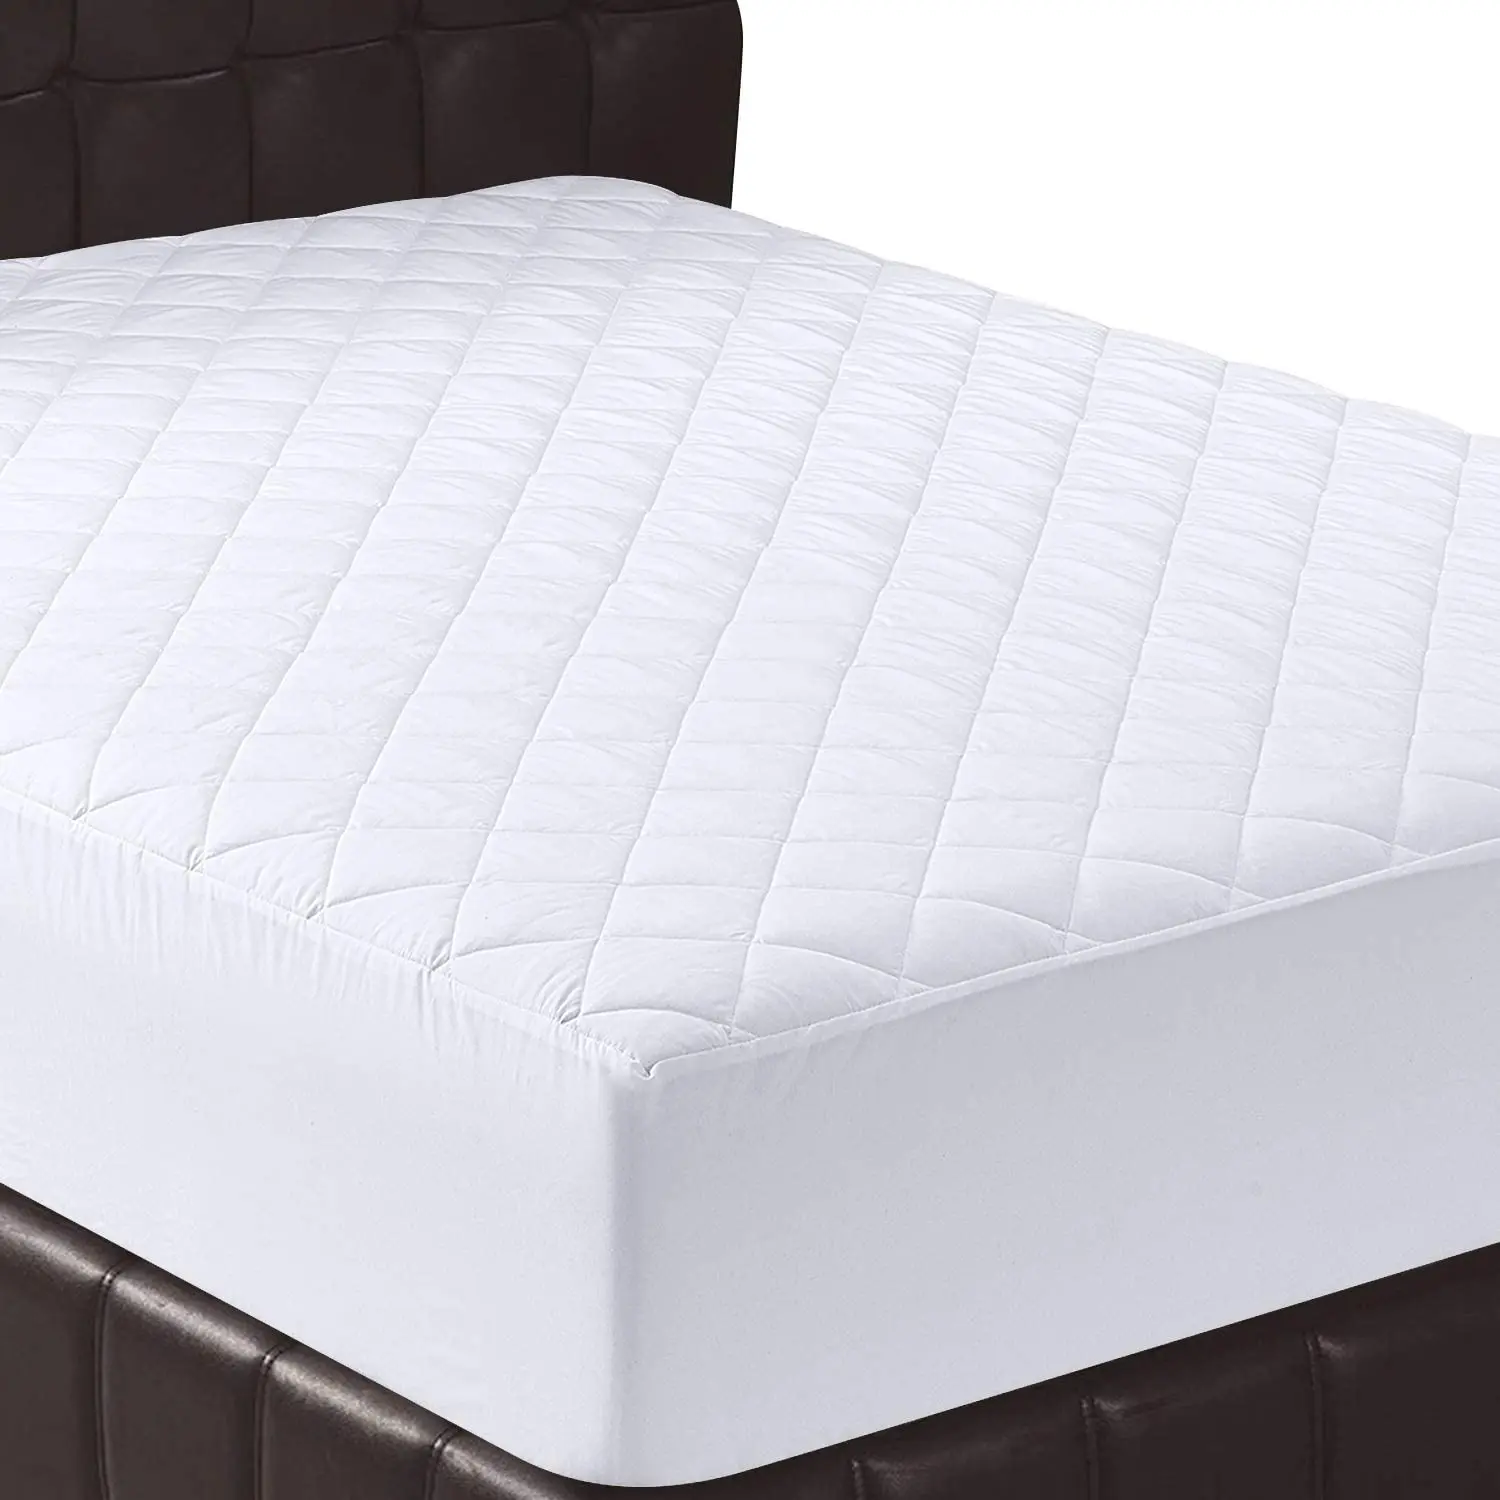 Fitted Sheet Polyester Mattress Cover Pad Queen Size Mattress Cooling  Bamboo 100% Waterproof Cover - Buy Hypoallergenic Waterproof Mattress  Protector,Baby Mattress Protector Waterproof,Mattress Protector Bamboo  Waterproof Product on Alibaba.com